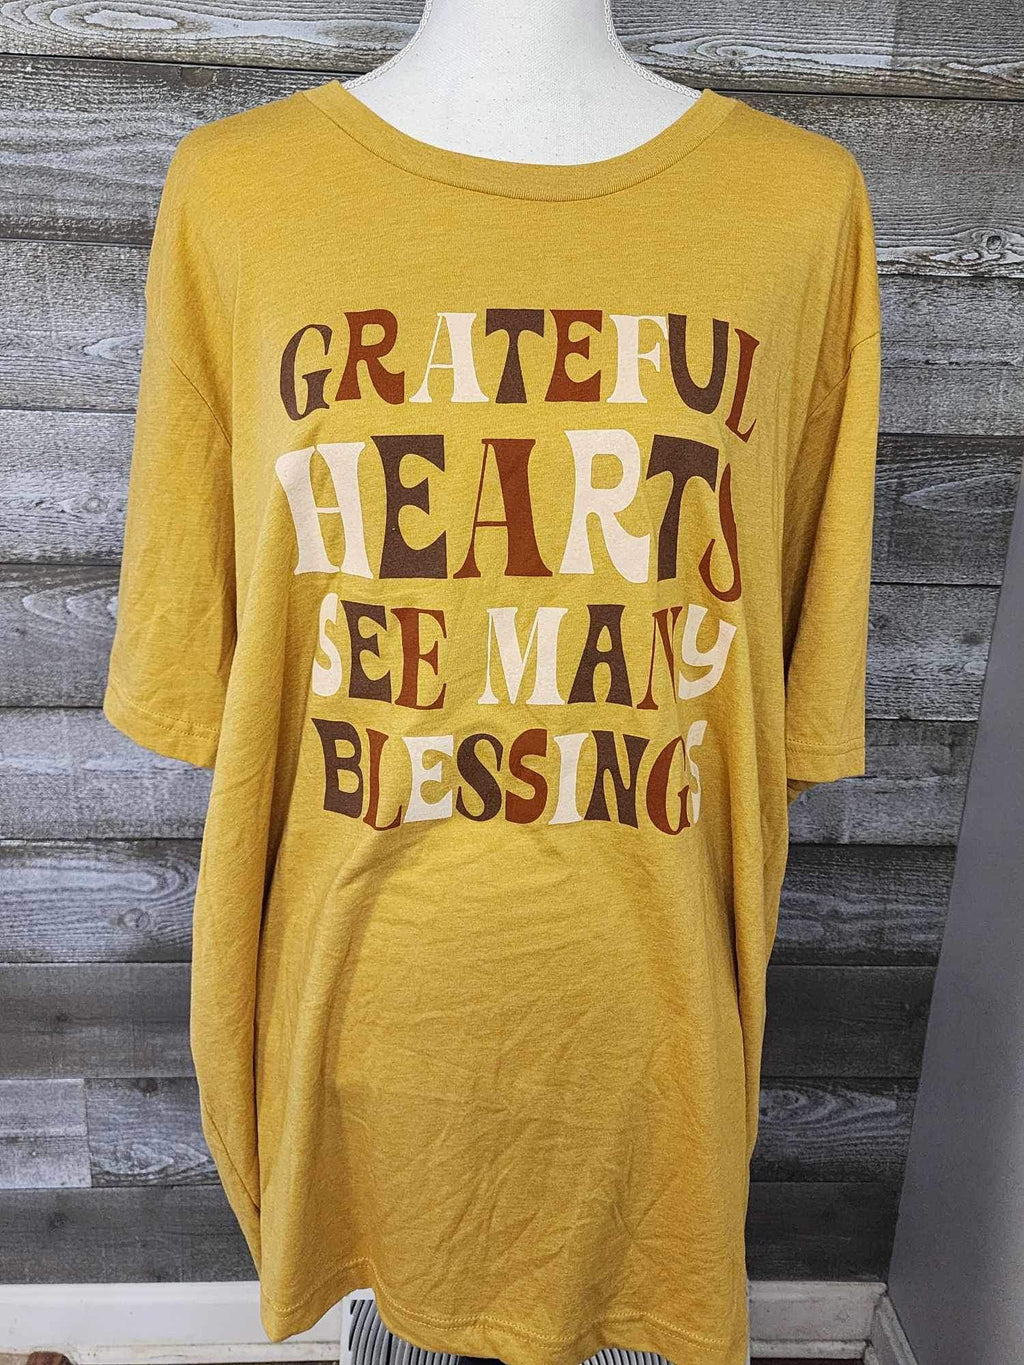 Grateful Hearts See Many Blessings Tee